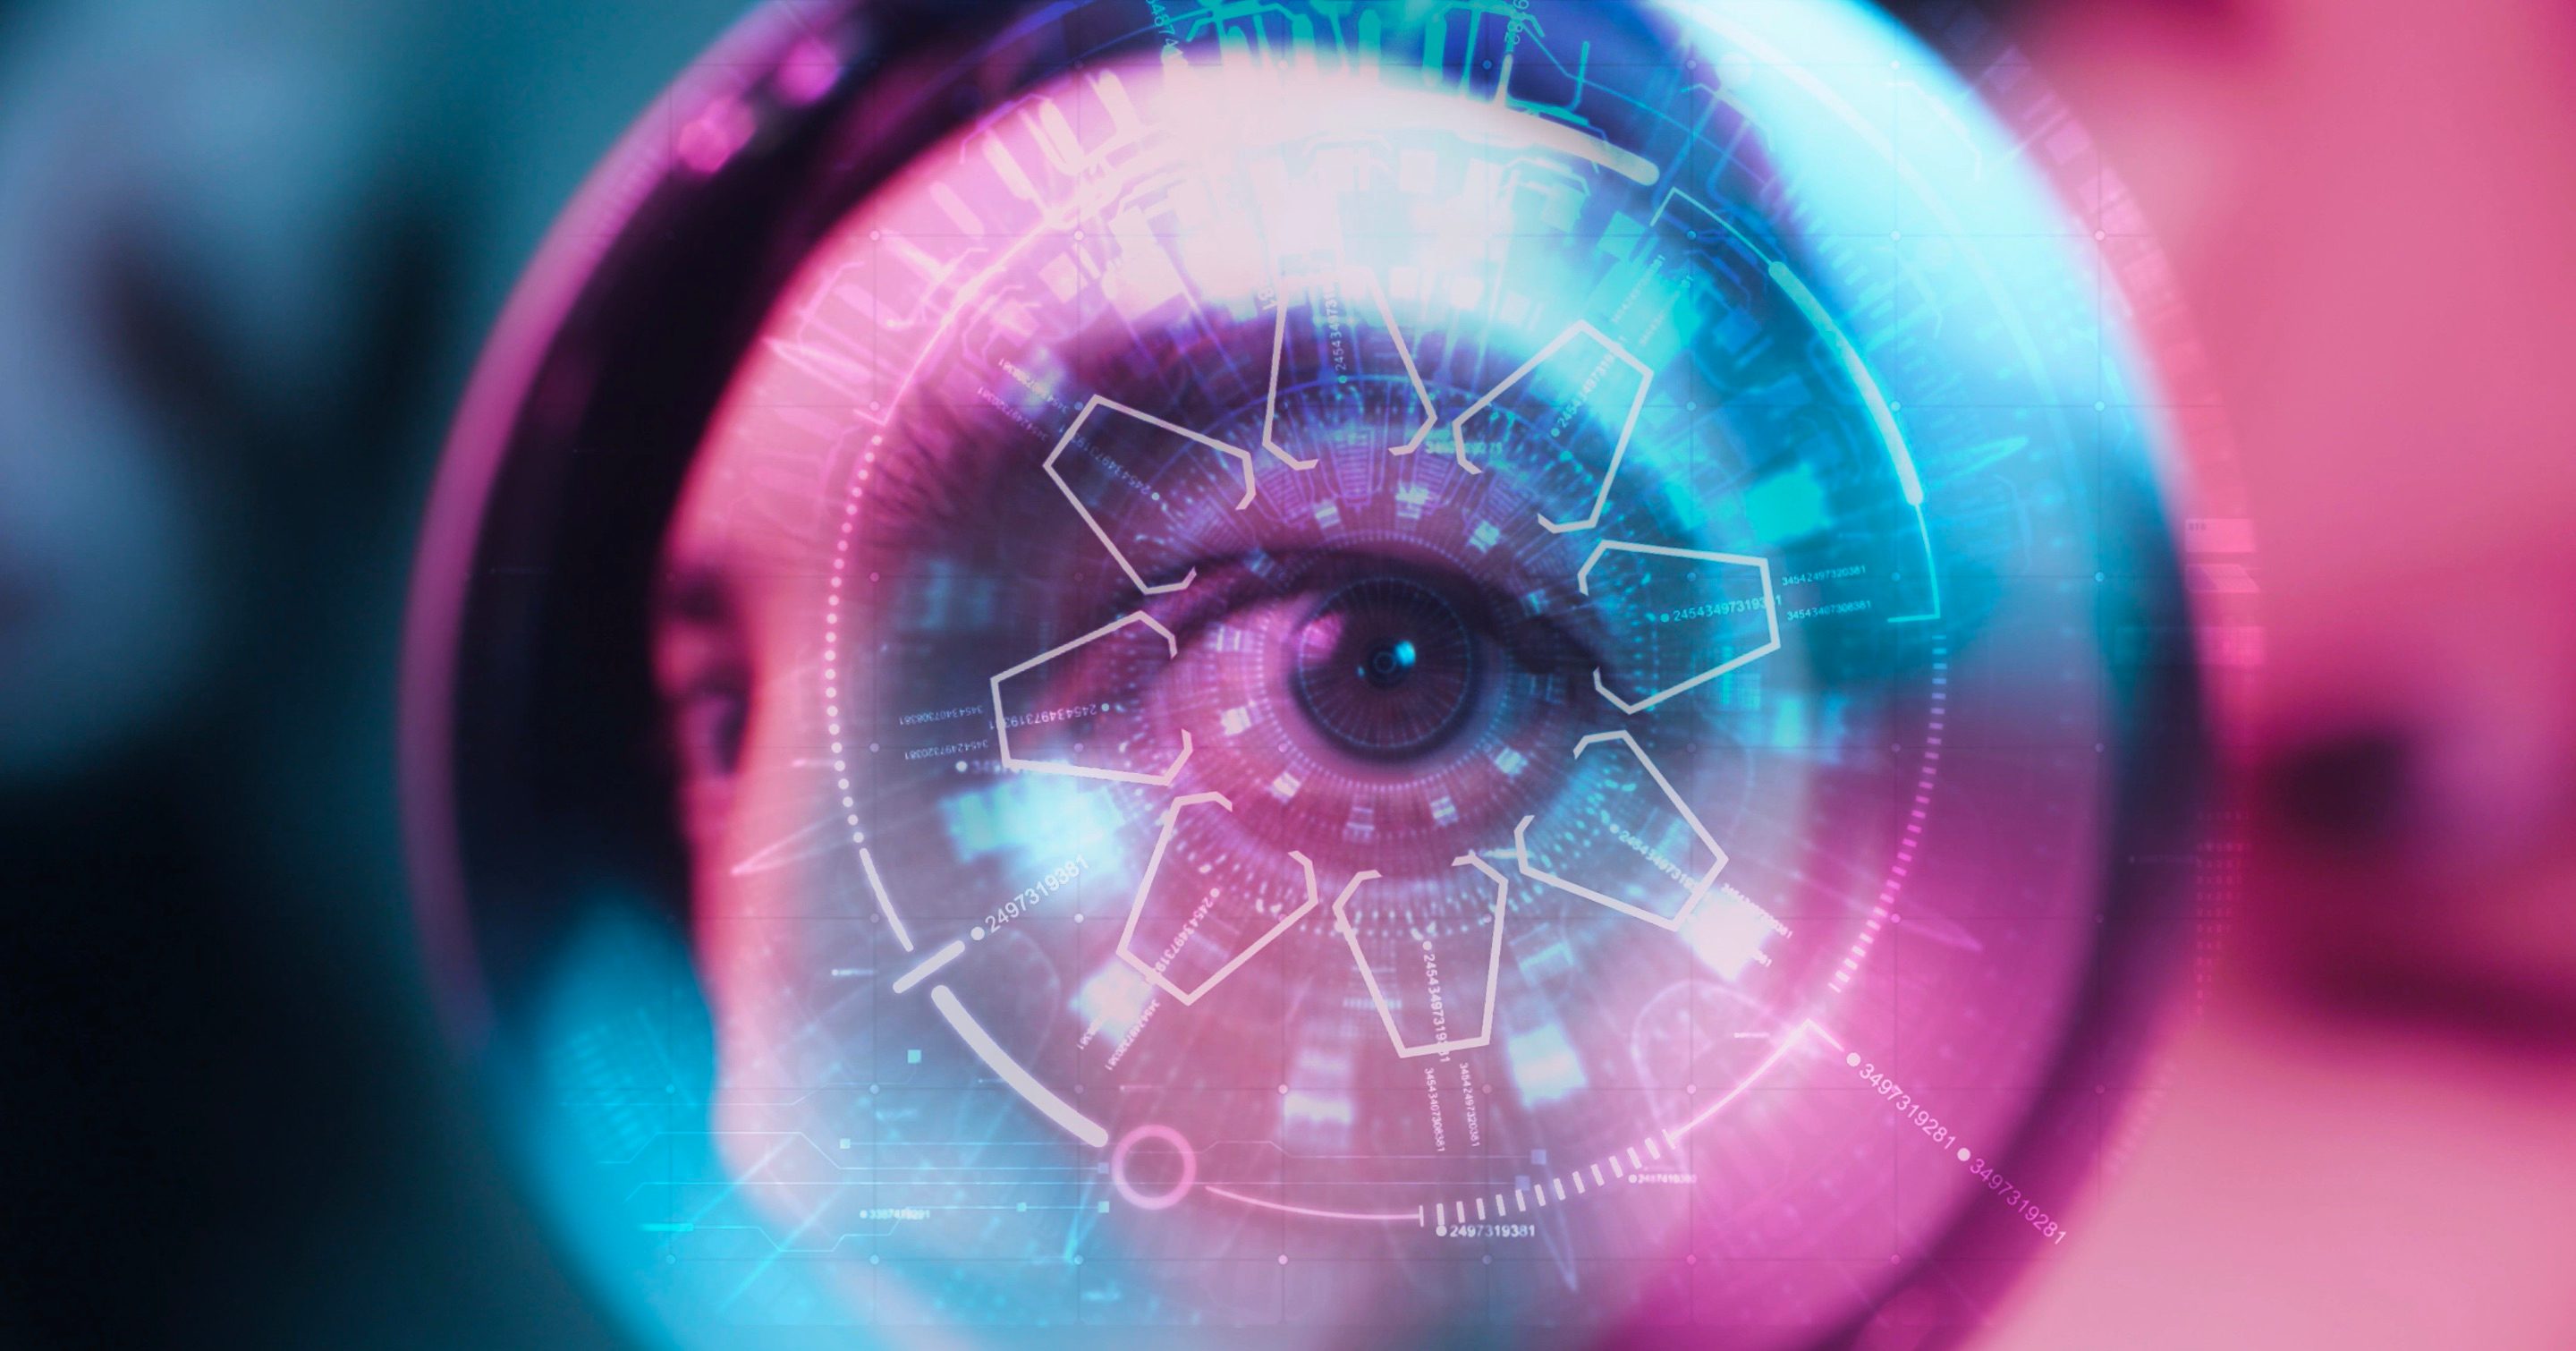 Image of an eye seen through a device that extracts data